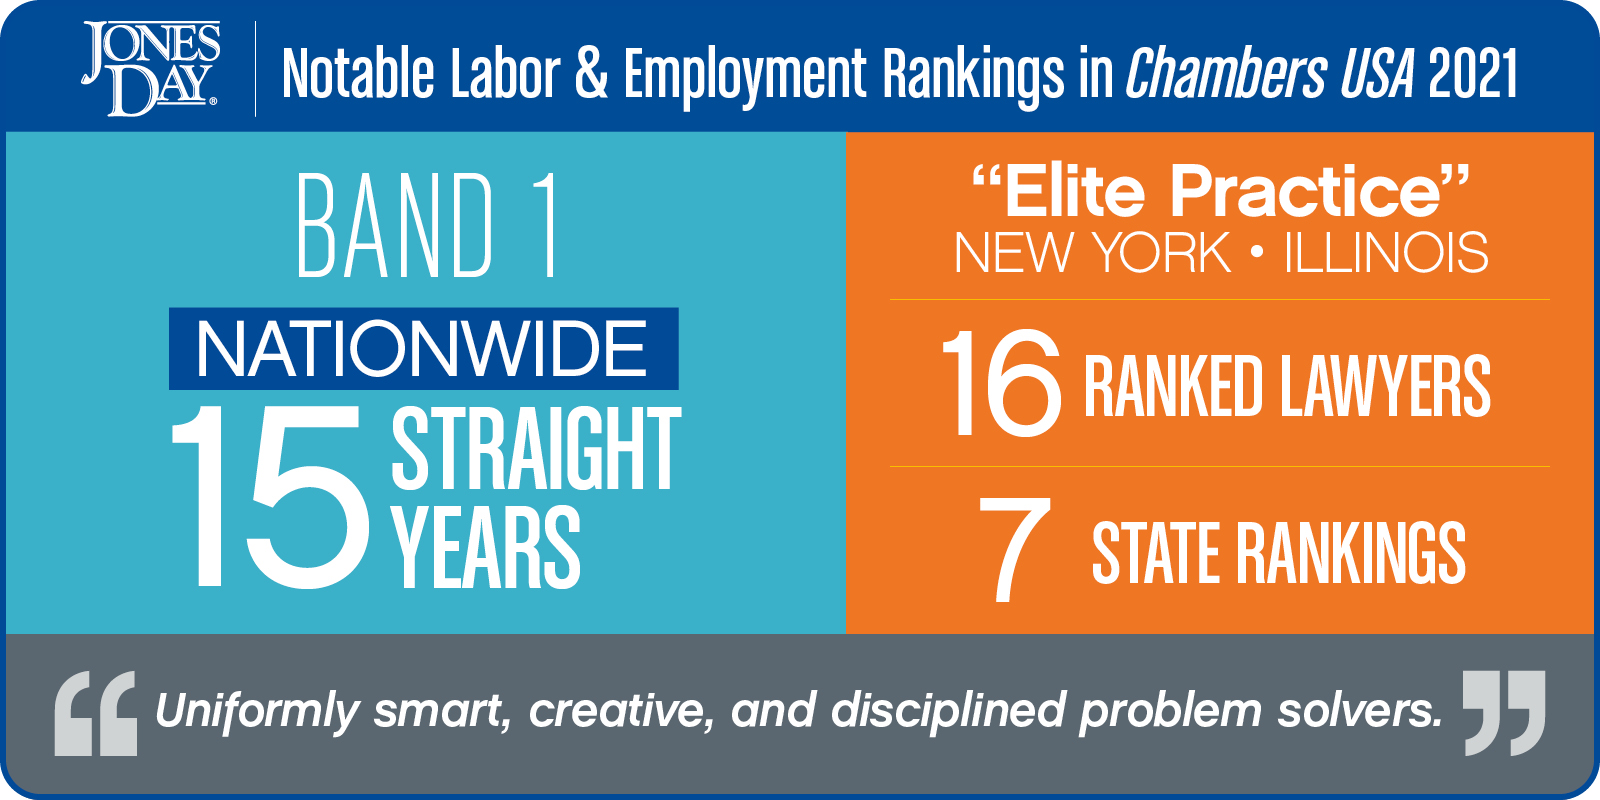 Chambers L and E Notable Rankings Infographic_202